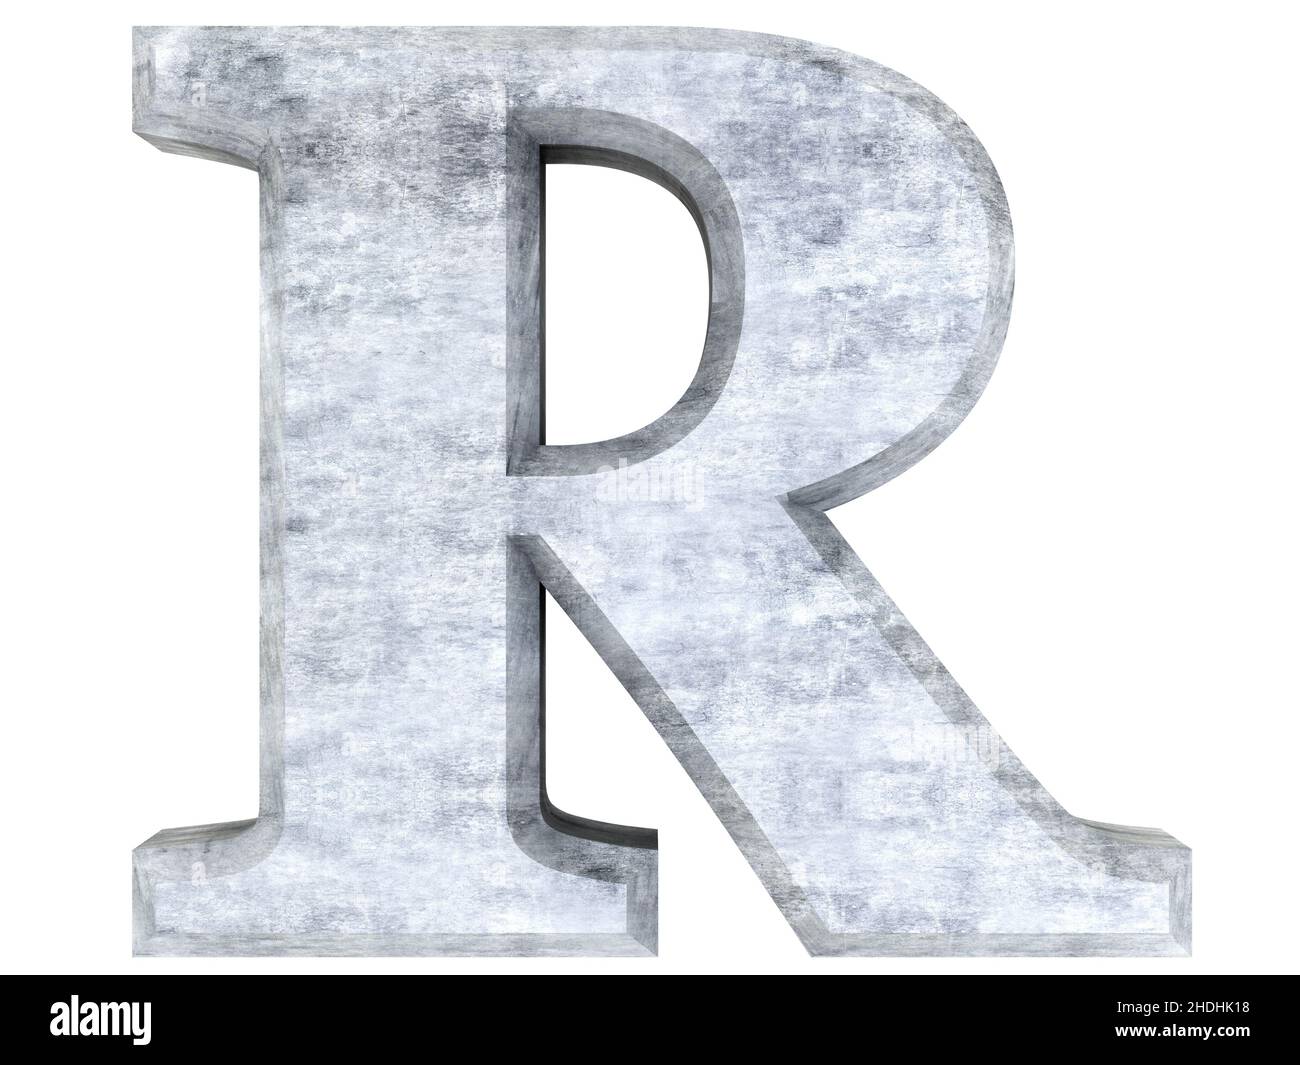 R object. Красиво зафотошопленная буква r. Letter r Russia. Буква r а снизу буква a. Man in the form of a Letter r.